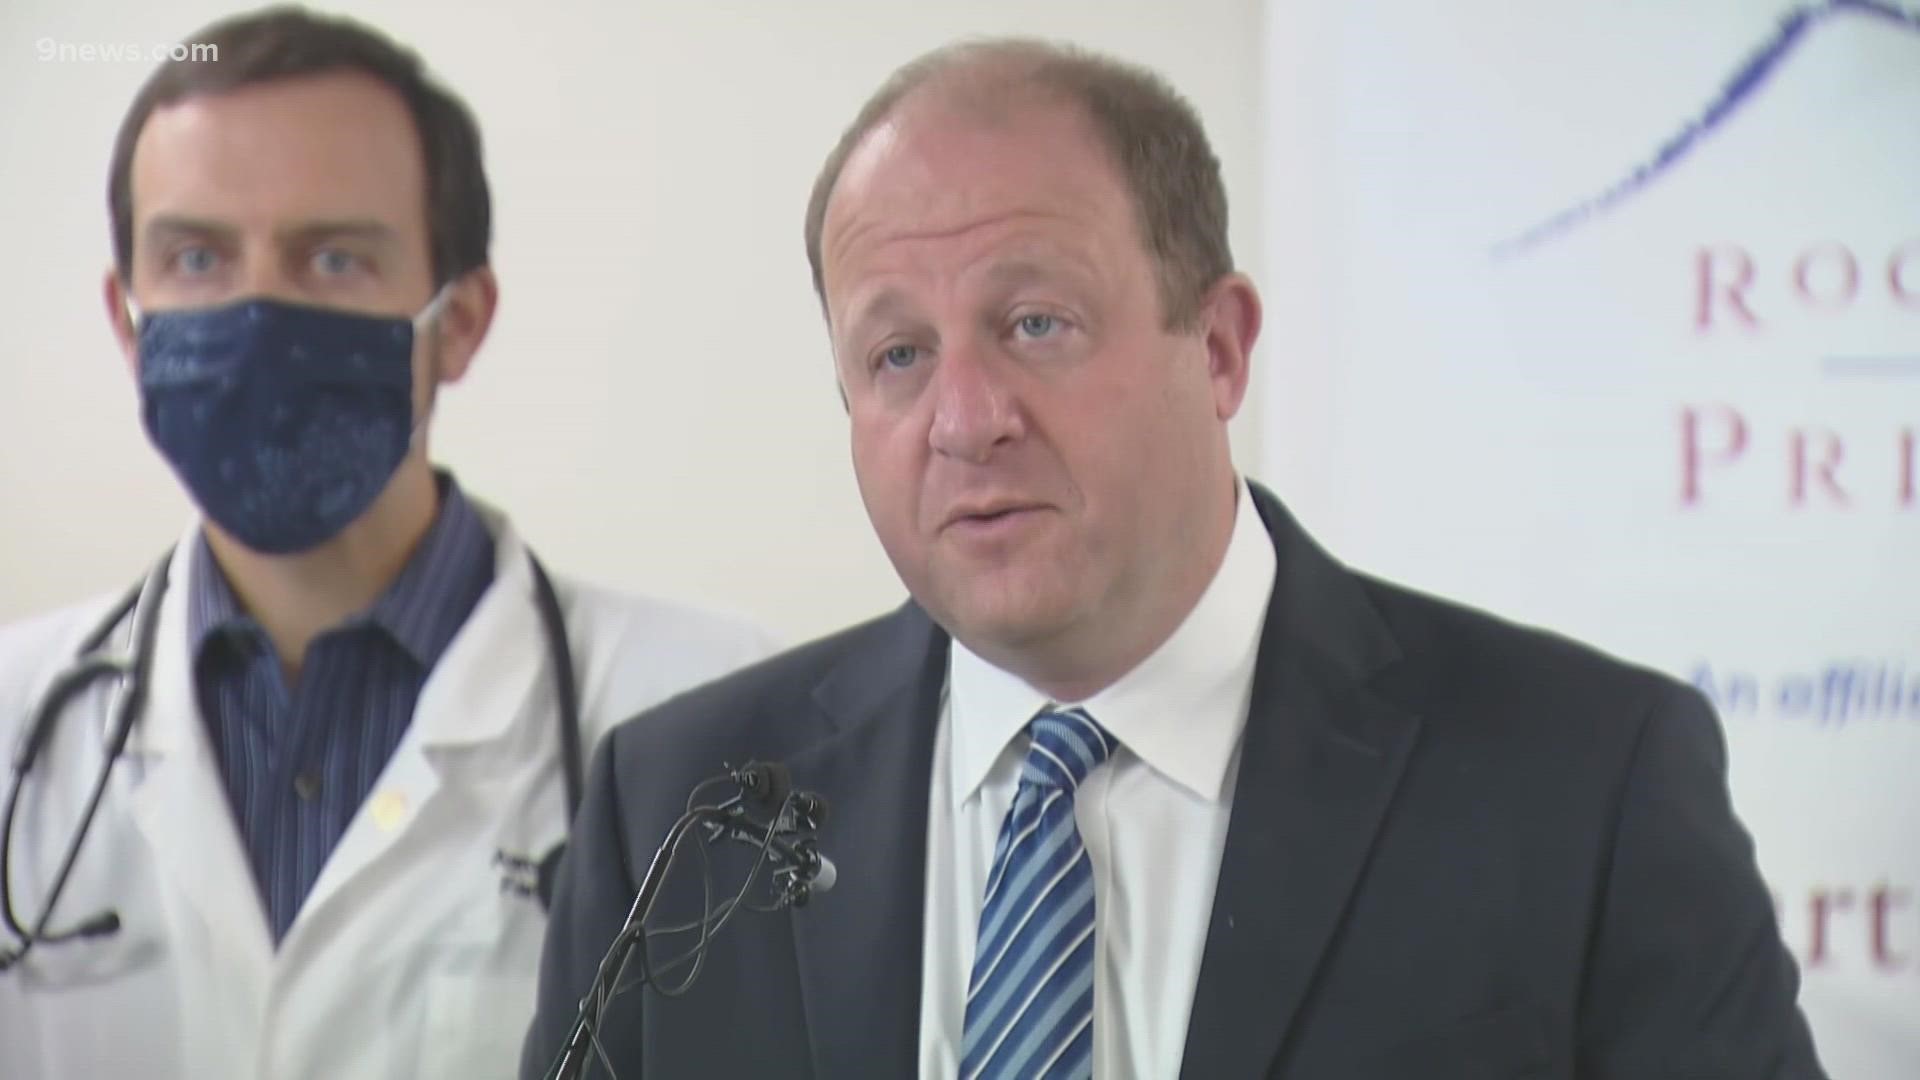 Polis provided an update Thursday on the state's response to the pandemic and announced details of a new COVID-19 primary care vaccination program.